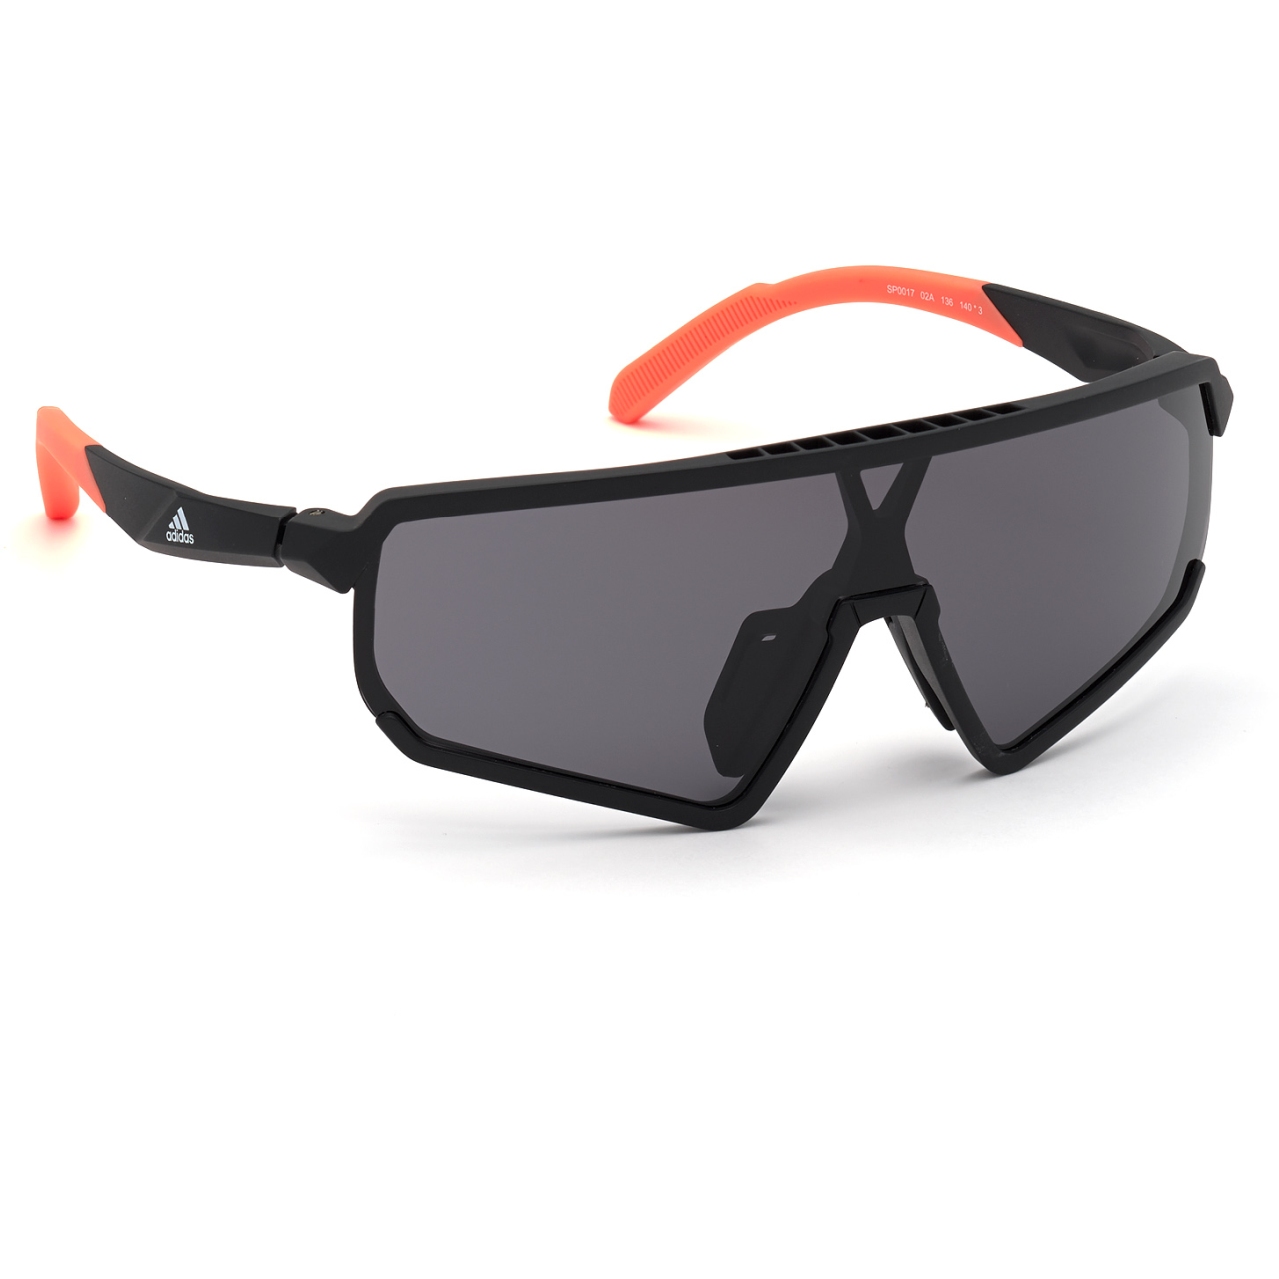 Picture of adidas Sp0017 Injected Sport Sunglasses - Matte Black / Contrast Black